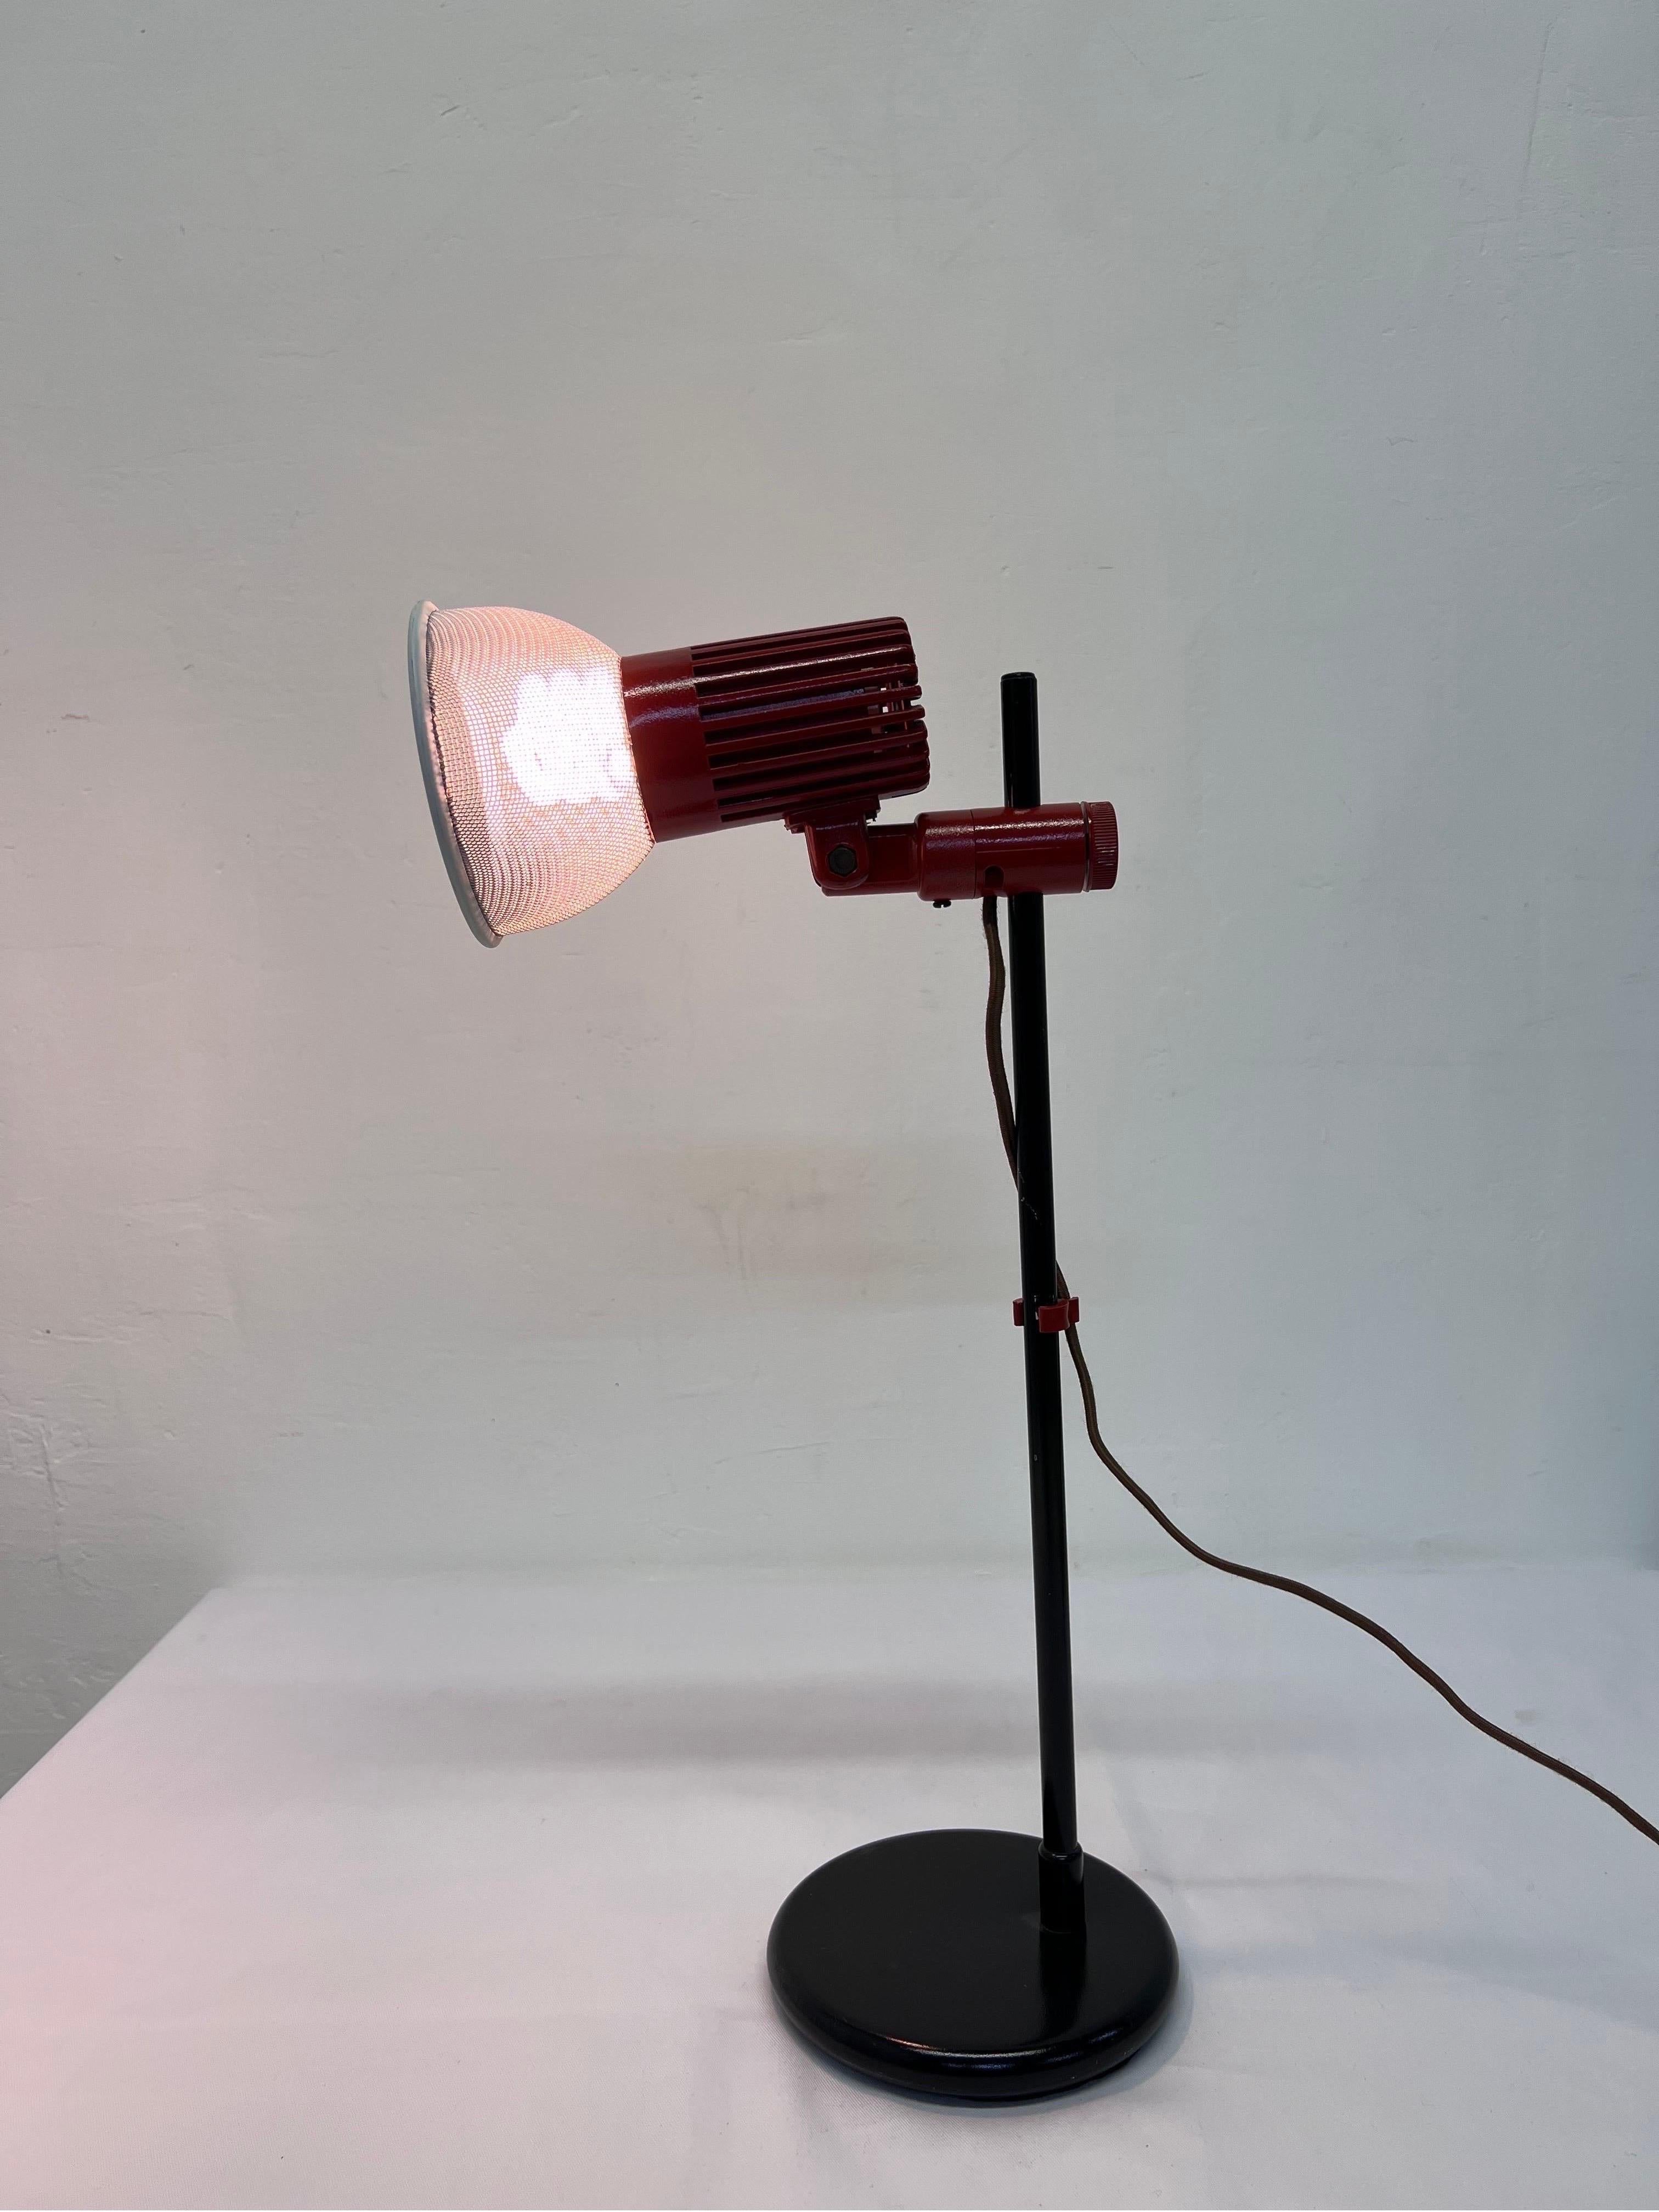 20th Century Mid-Century Adjustable Desk or Table Lamp with Perforated Shade by Unilite For Sale